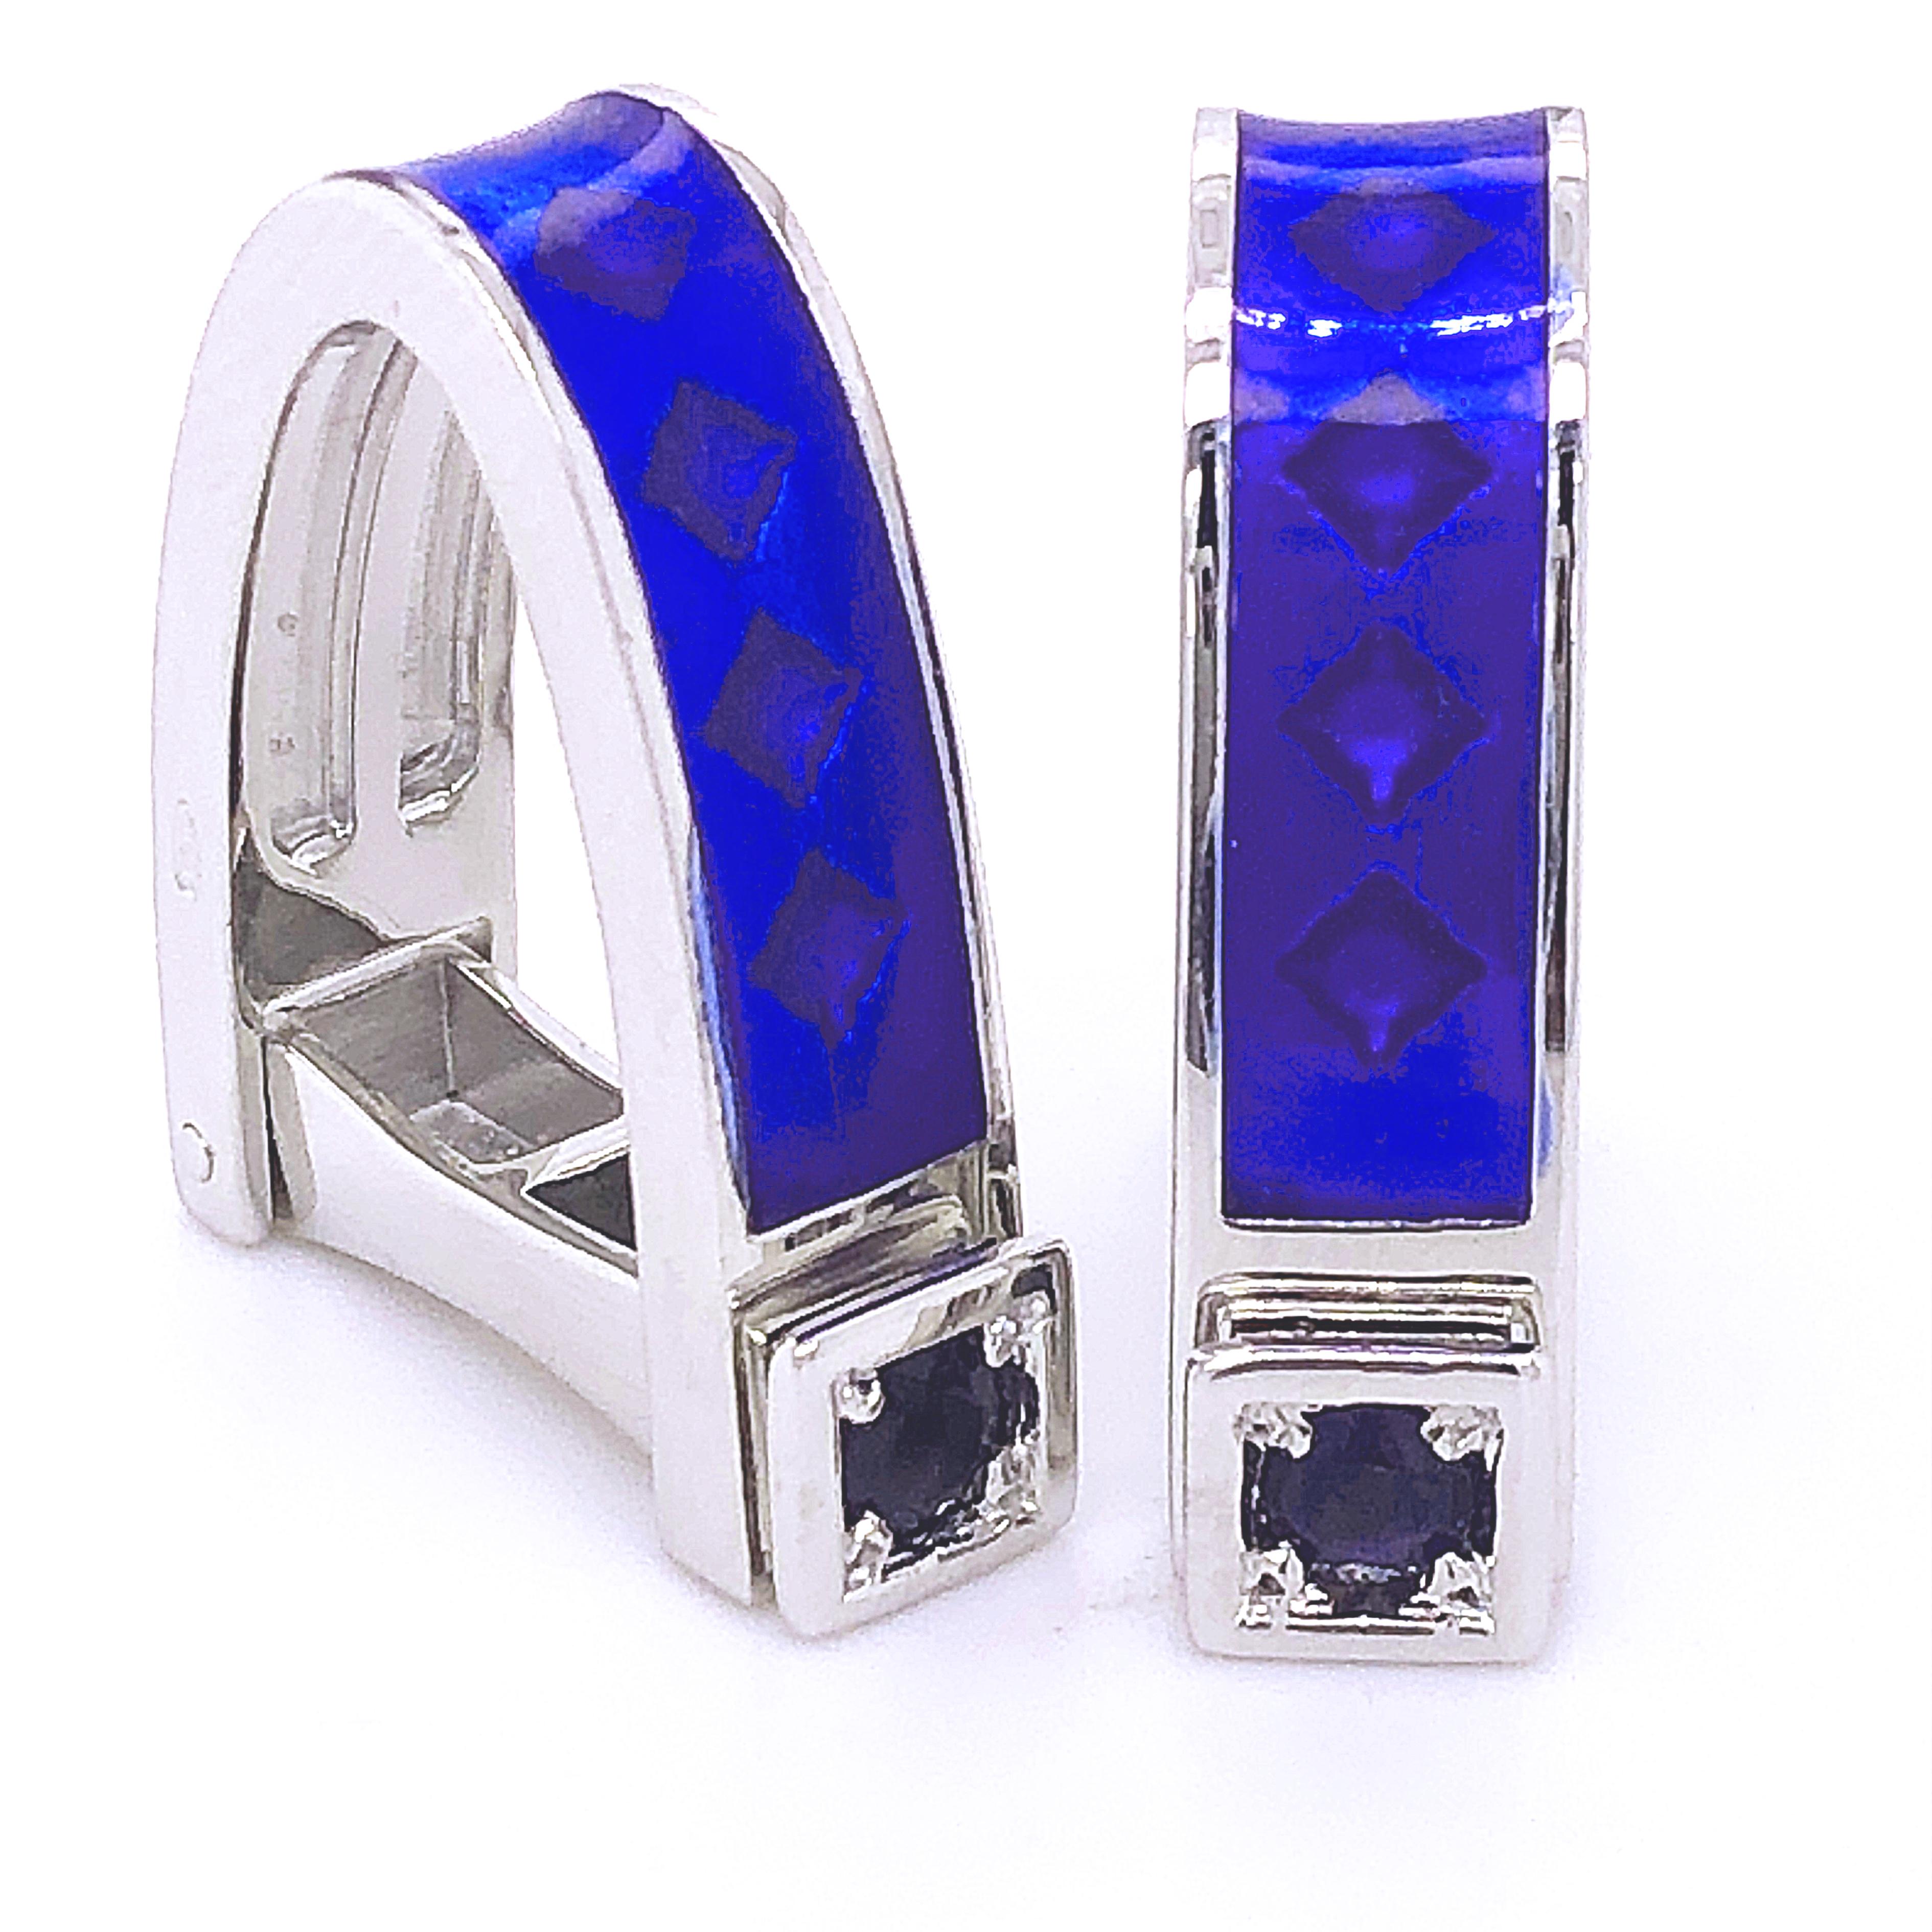 Chic, Unique yet Timeless Natural 0.30Kt Brilliant Iolite Navy Blue Hand Enameled Stirrup Shaped Sterling Silver Cufflinks.
In our Smart Black Box and Pouch.